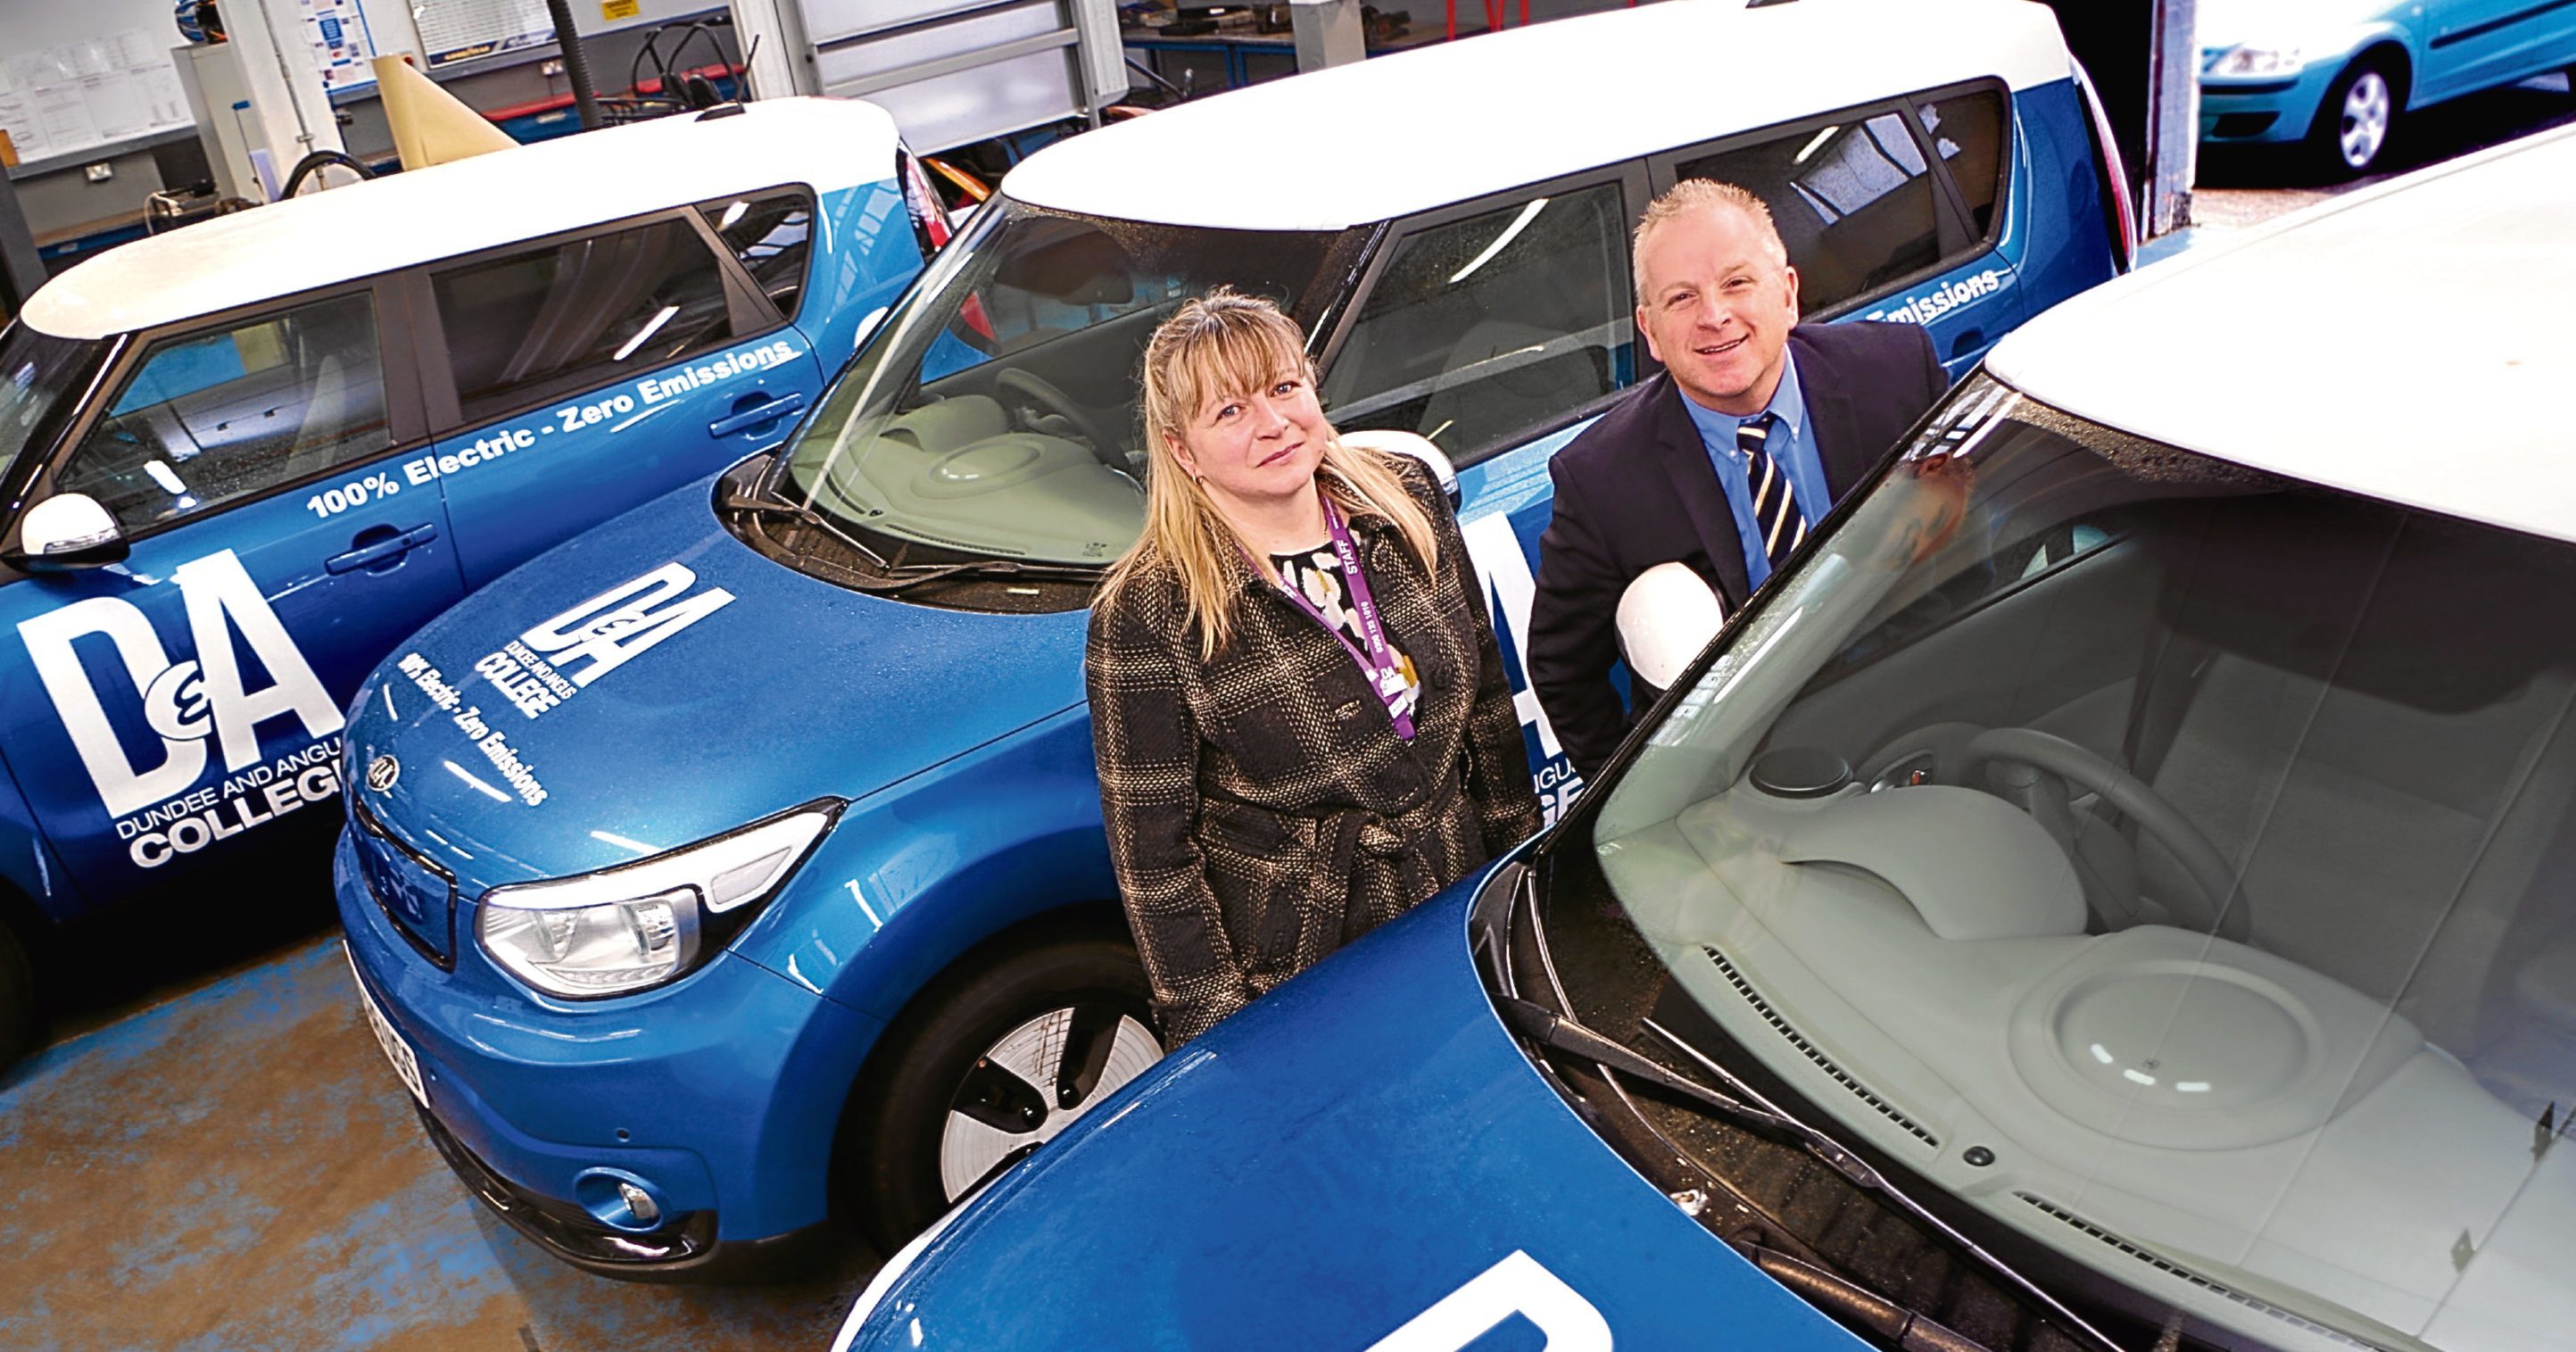 Environmental officer Jackie Beresford and Billy Grace, head of estates, with the cars.